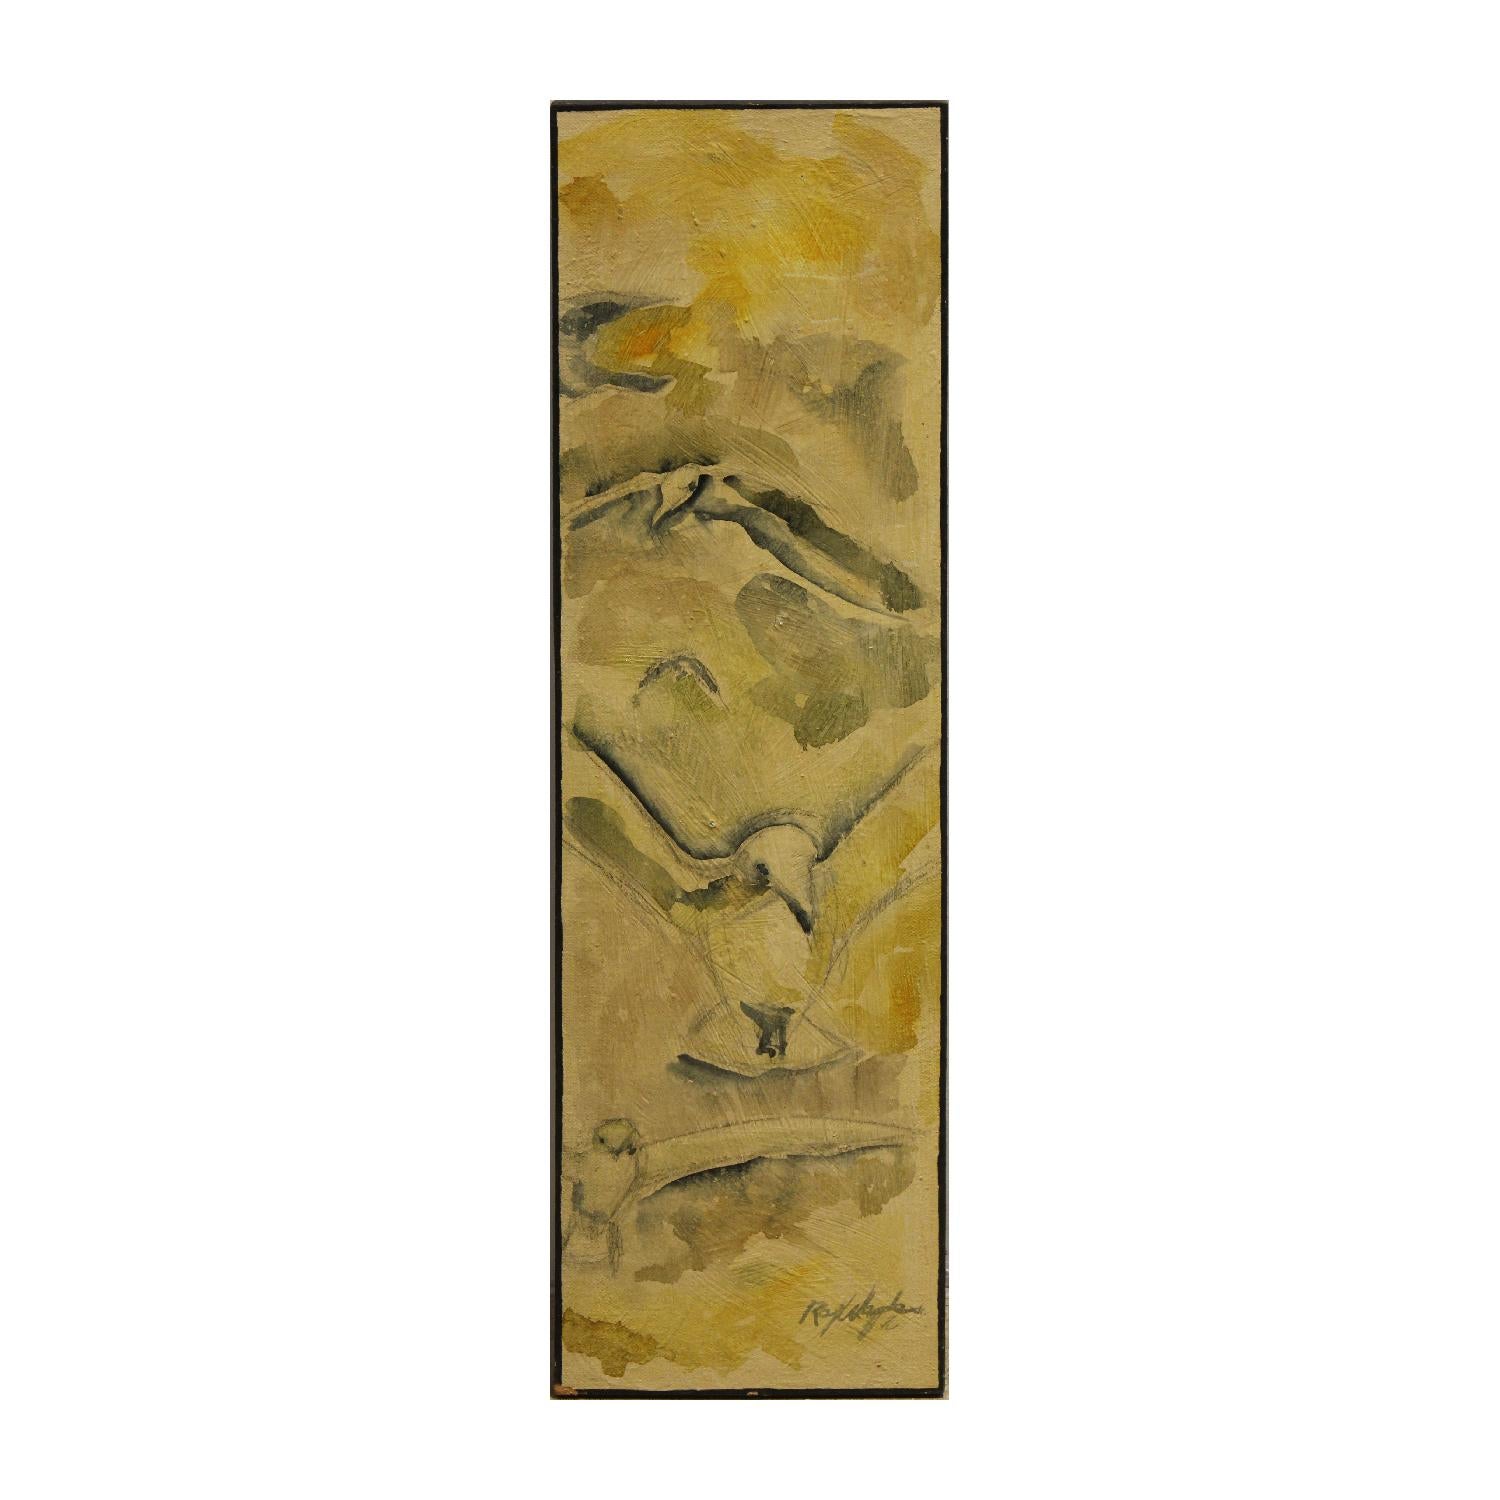 Robert Boyle Abstract Painting - Abstract Expressionist Painting of Yellow Toned Birds / Seagulls